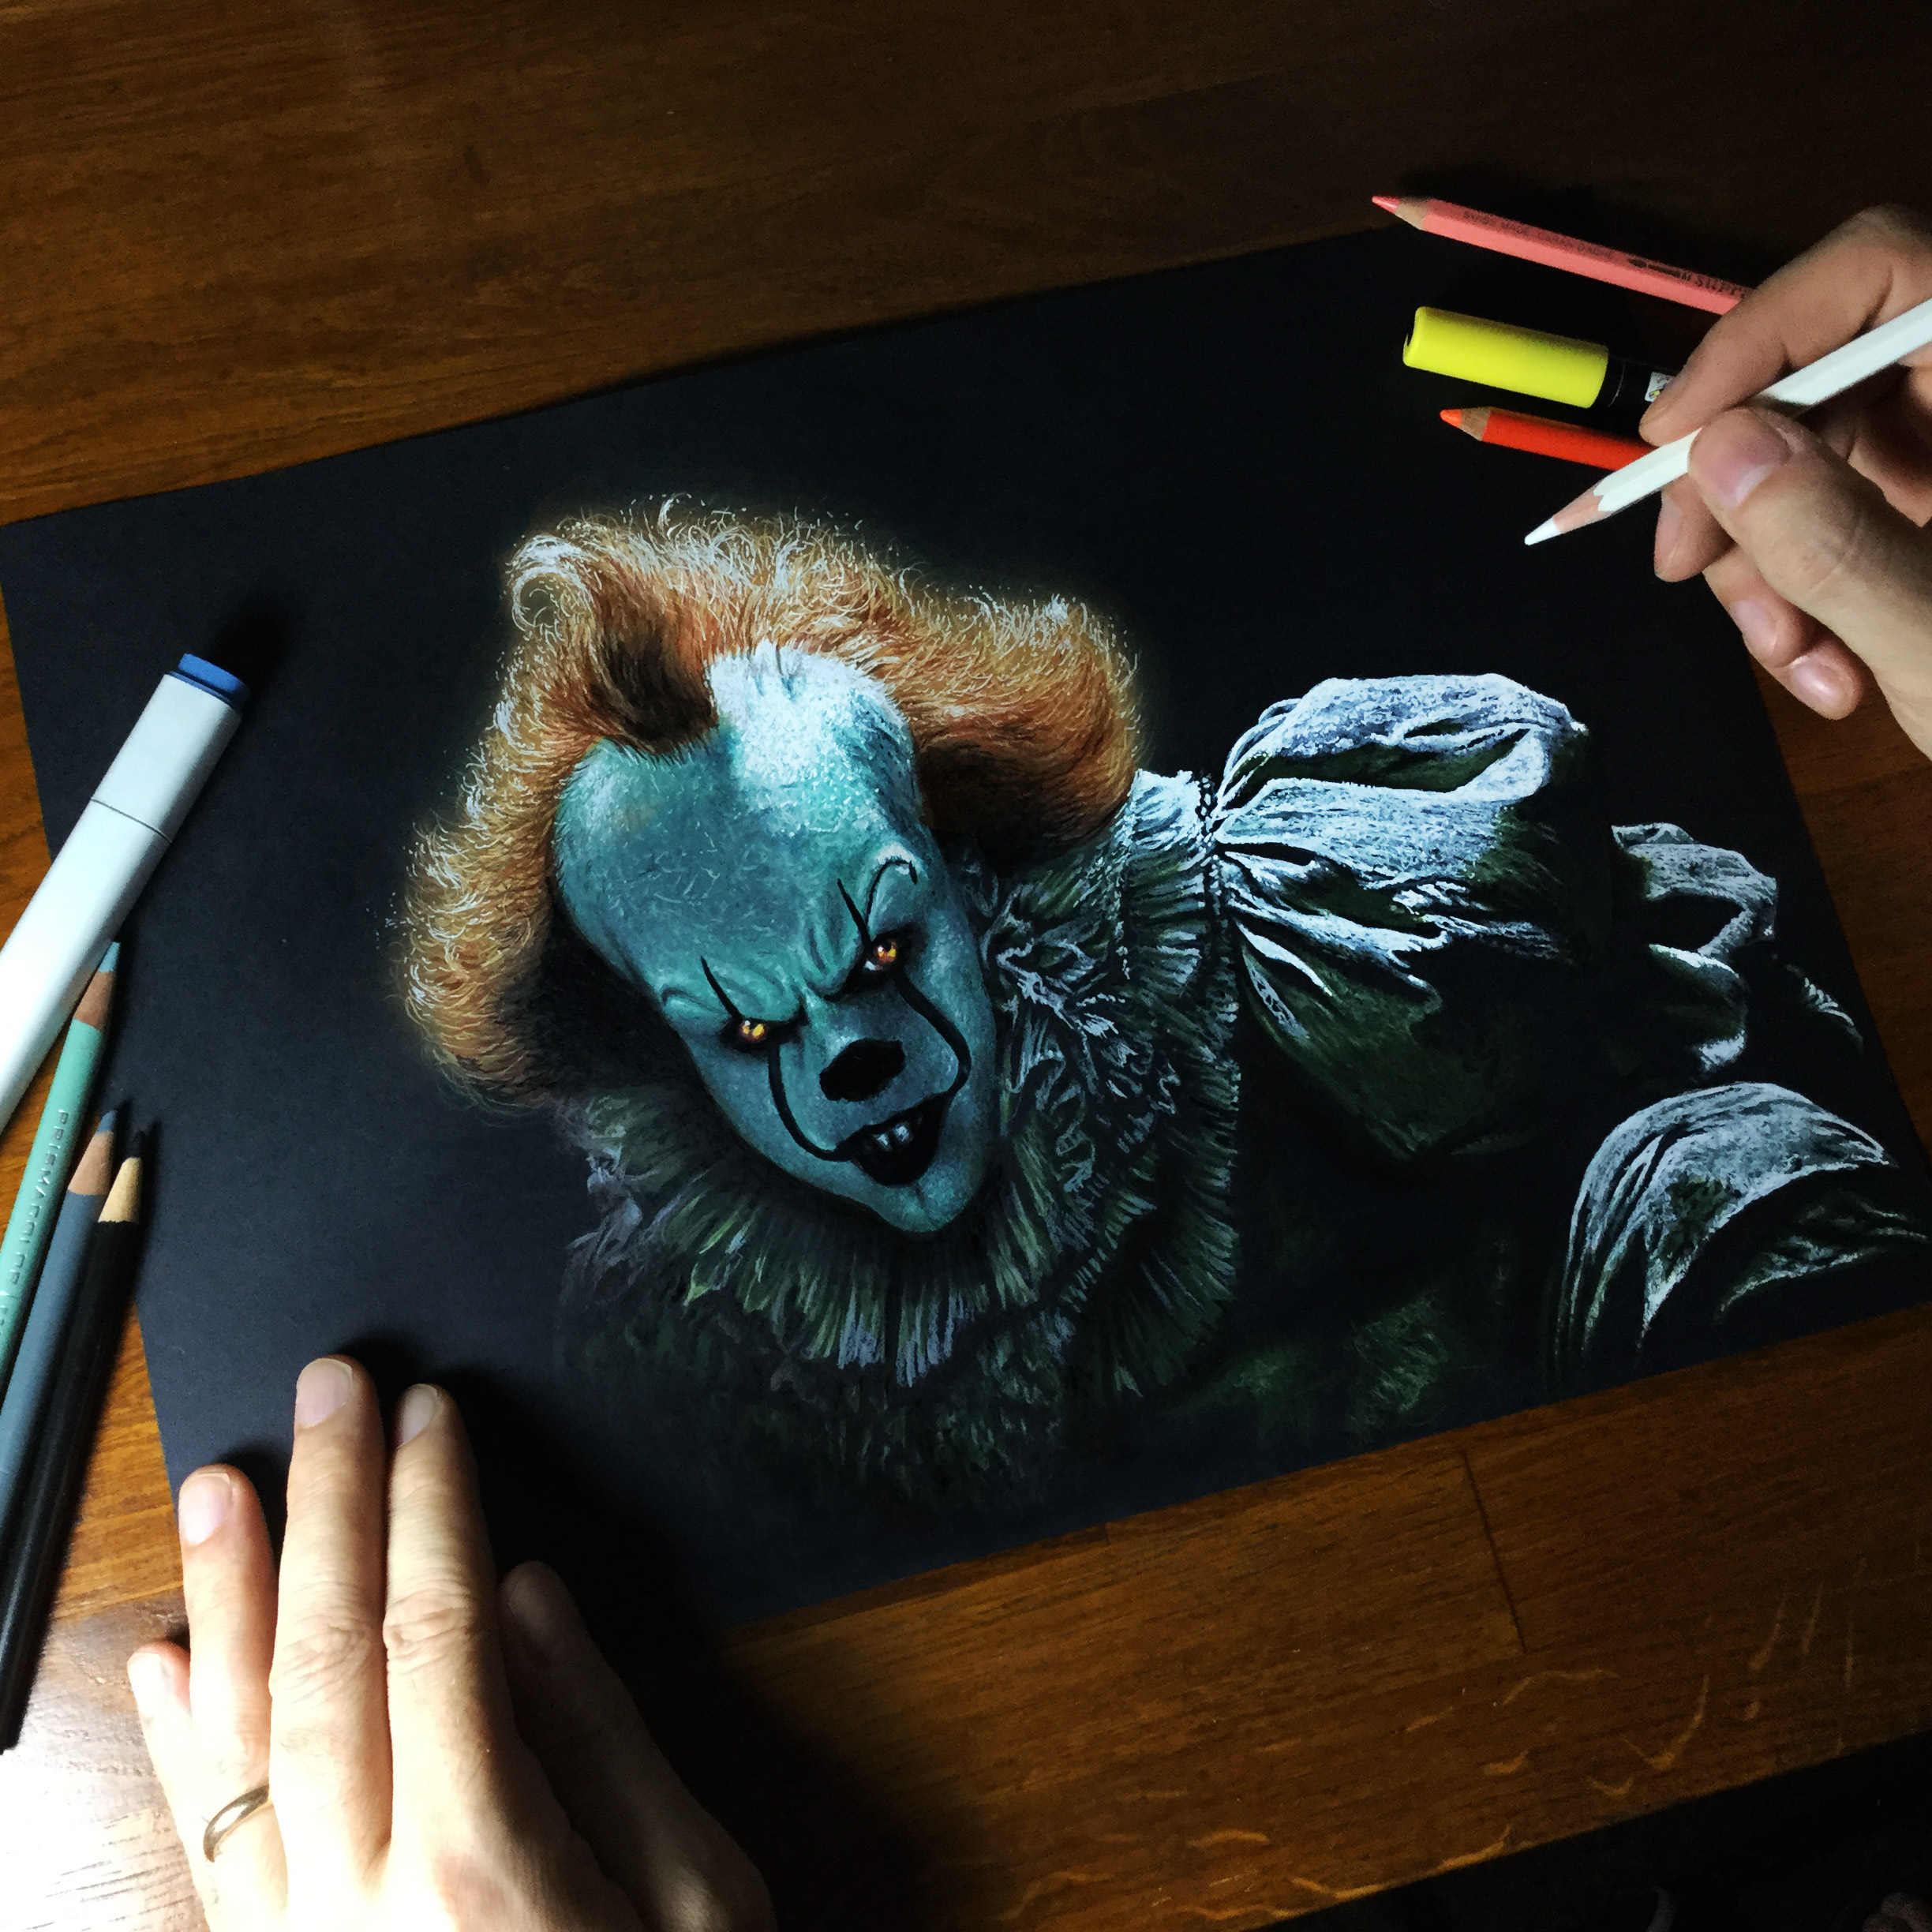 Pennywise Drawing on Black Paper by marcellobarenghi on DeviantArt